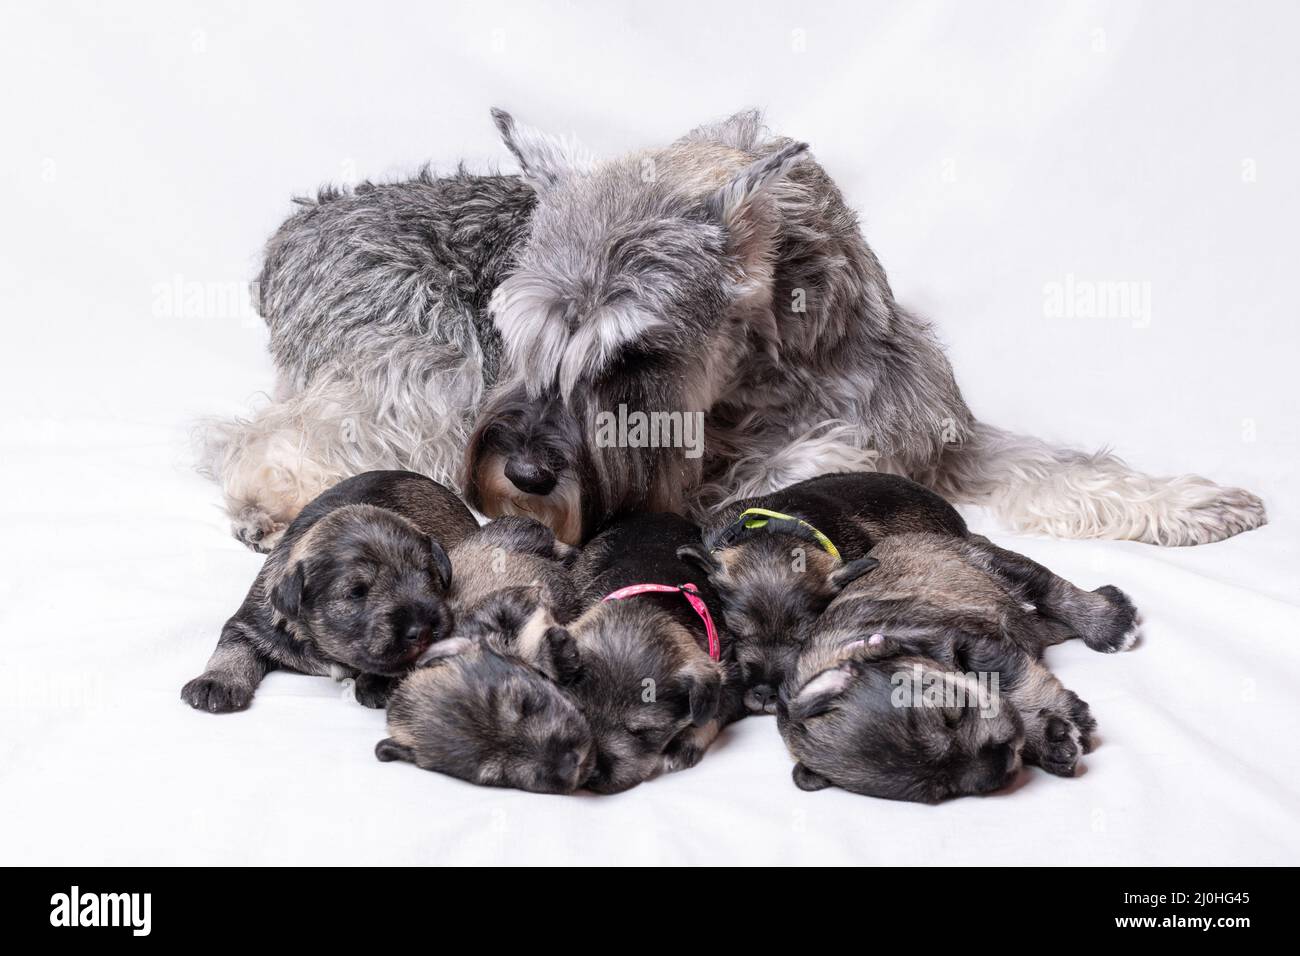 Mom gray miniature schnauzer feeds puppies on a white background. Mom dog is nursing milk from her baby. Well-fed, happy puppies next to their mother. Stock Photo